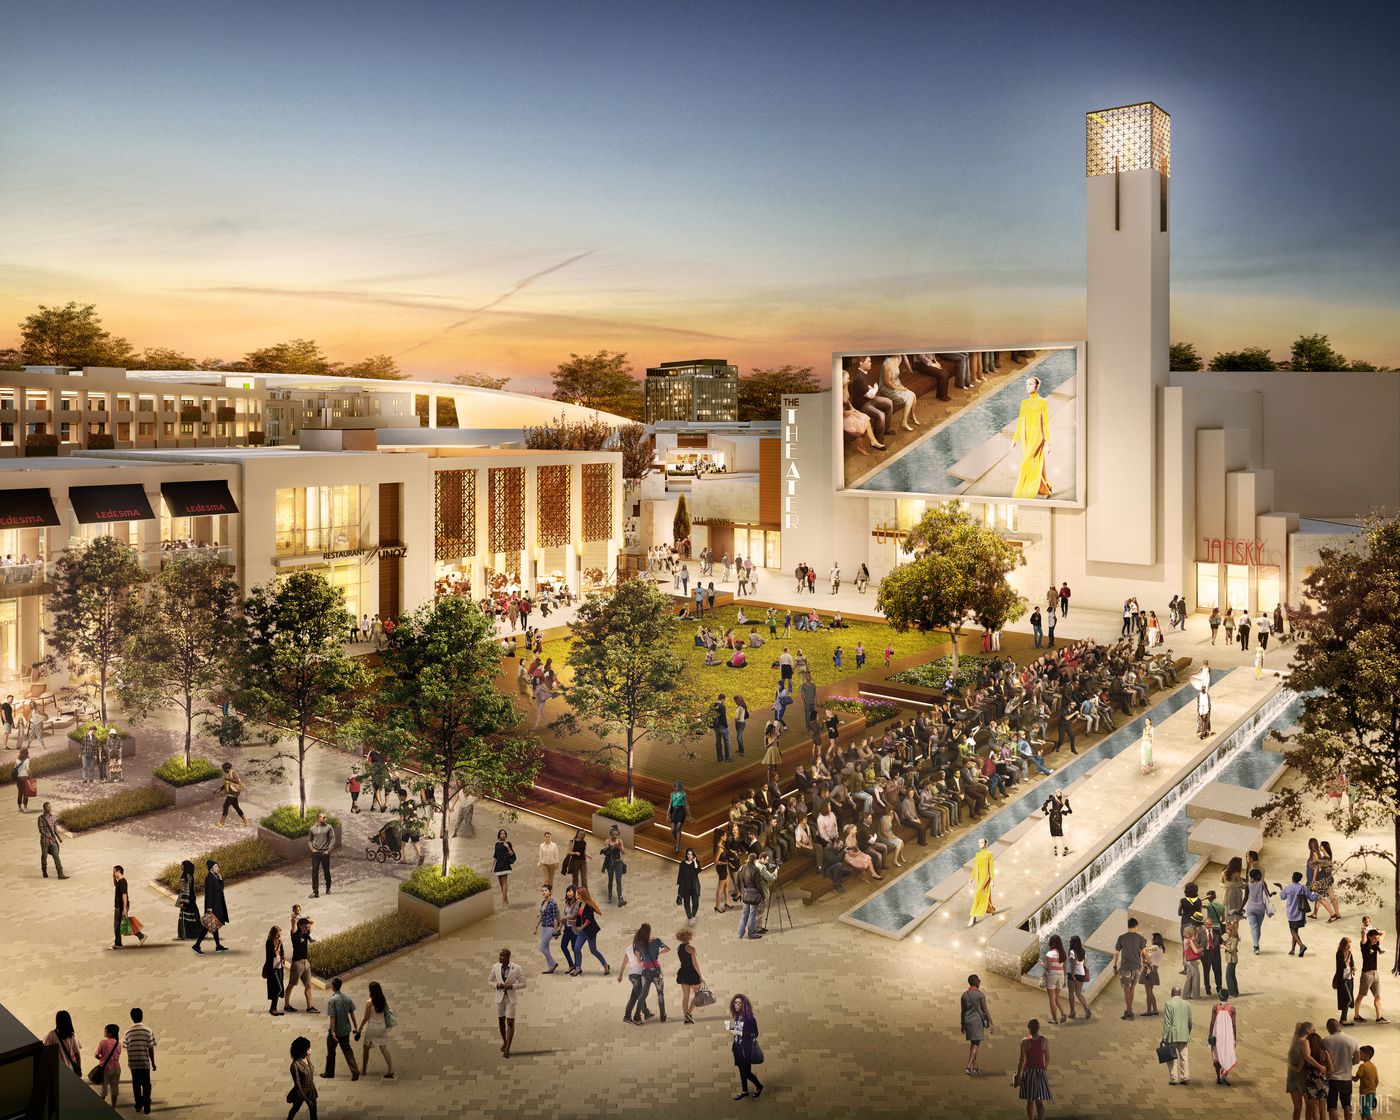 Rendering of the new Los Angeles Rams stadium mixed-use village in Inglewood, California